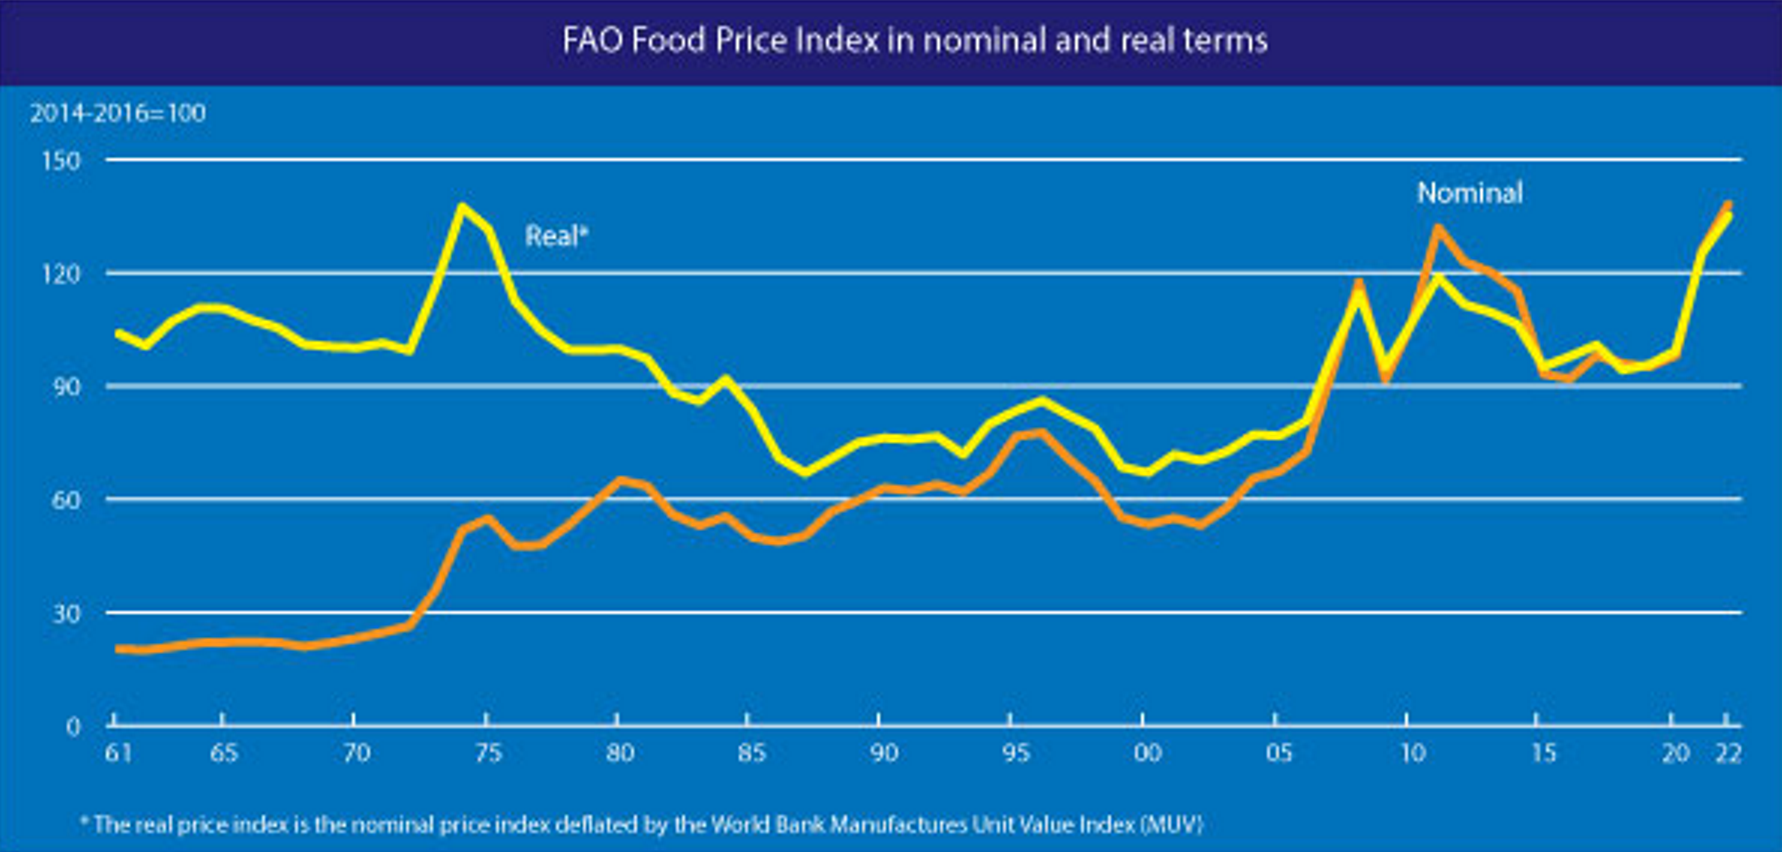 FAO Food Price Index, January 1961 - February 2022. In February 2022, the FAO Food Price Index (FFPI), averaged 140.7 points, up 5.3 points (3.9 percent) from January and as much as 24.1 points (20.7 percent) above its level a year ago. This represents a new all-time high, exceeding the previous top of February 2011 by 3.1 points. The February rise was led by large increases in vegetable oil and dairy price sub-indices. Cereals and meat prices were also up, while the sugar price sub-index fell for the third consecutive month. Graphic: FAO